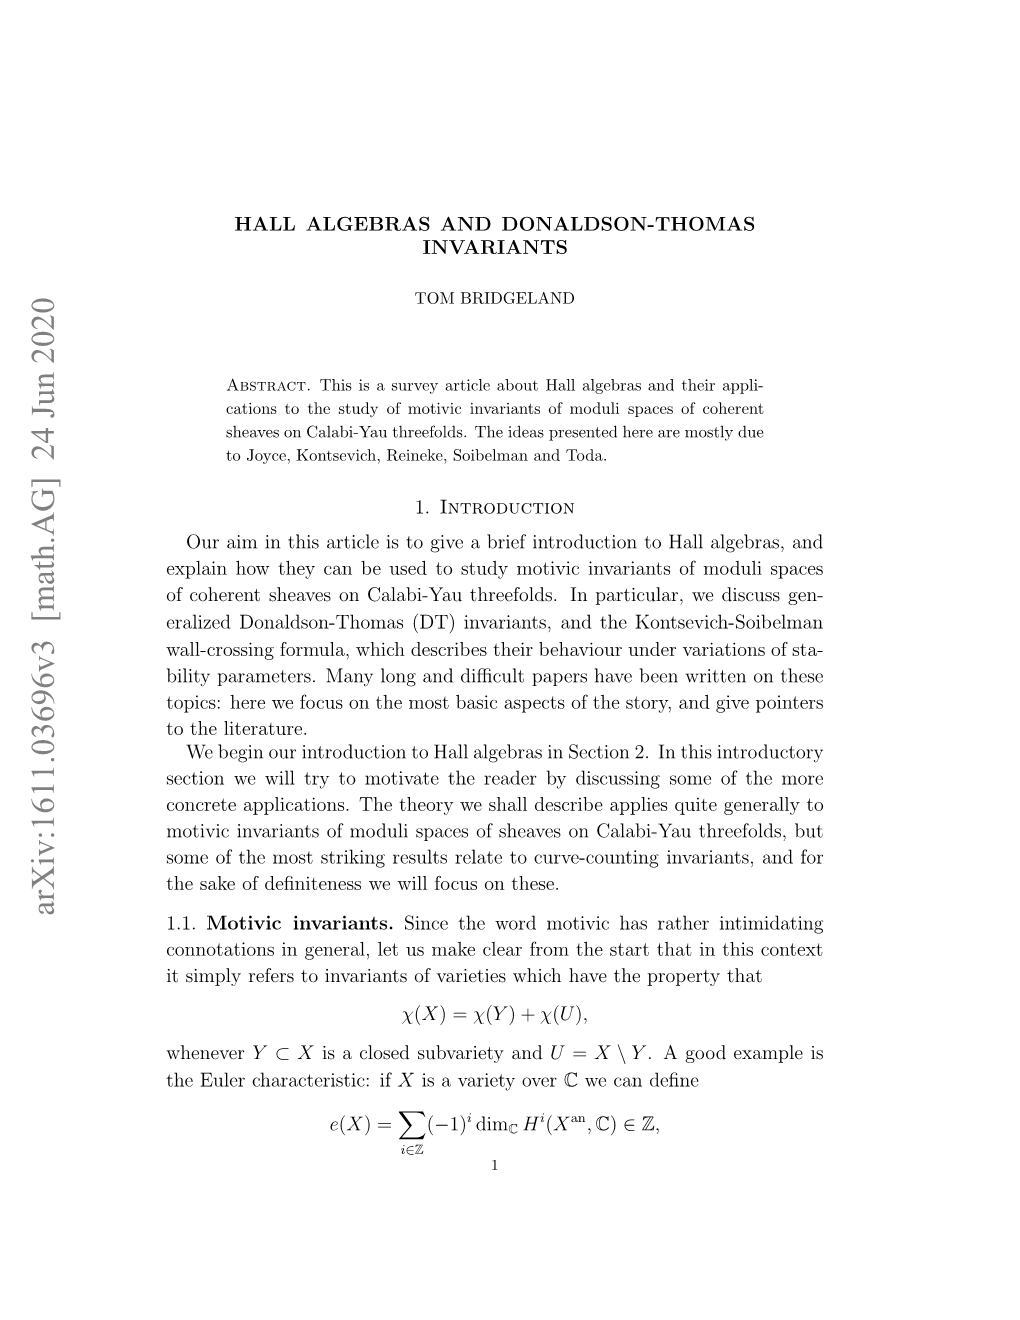 HALL ALGEBRAS and DONALDSON-THOMAS INVARIANTS 3 Statements Here This Suﬃces; the Full Scheme-Theoretic Isomorphism Is Covered in [33, Section 2])